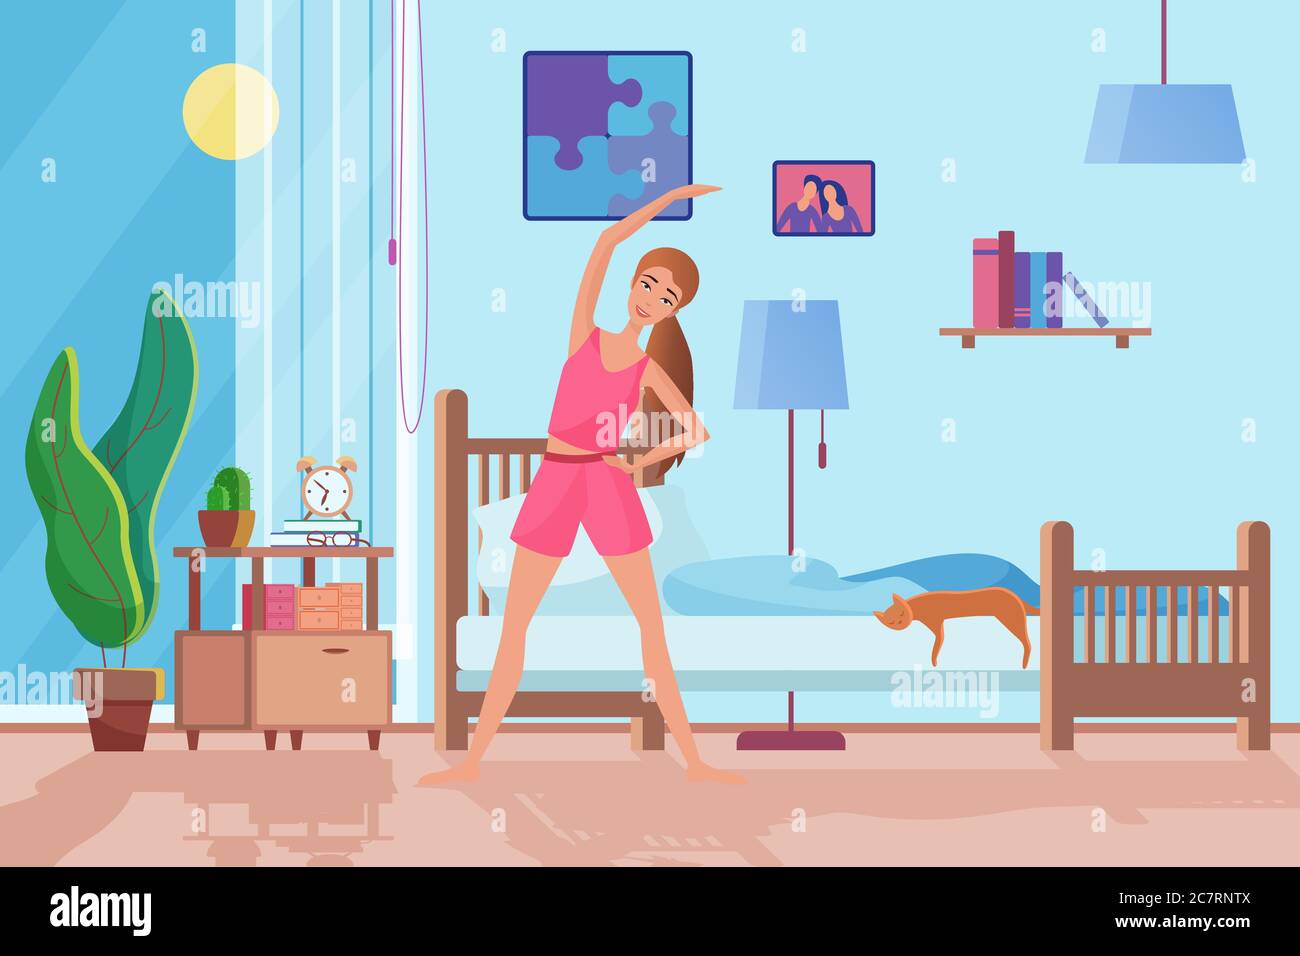 Morning exercises flat vector illustration. Healthy lifestyle, woman doing sport, training, workout at home. Smiling female cartoon character activity, cat sleeping on bed. Lady room interior design Stock Vector